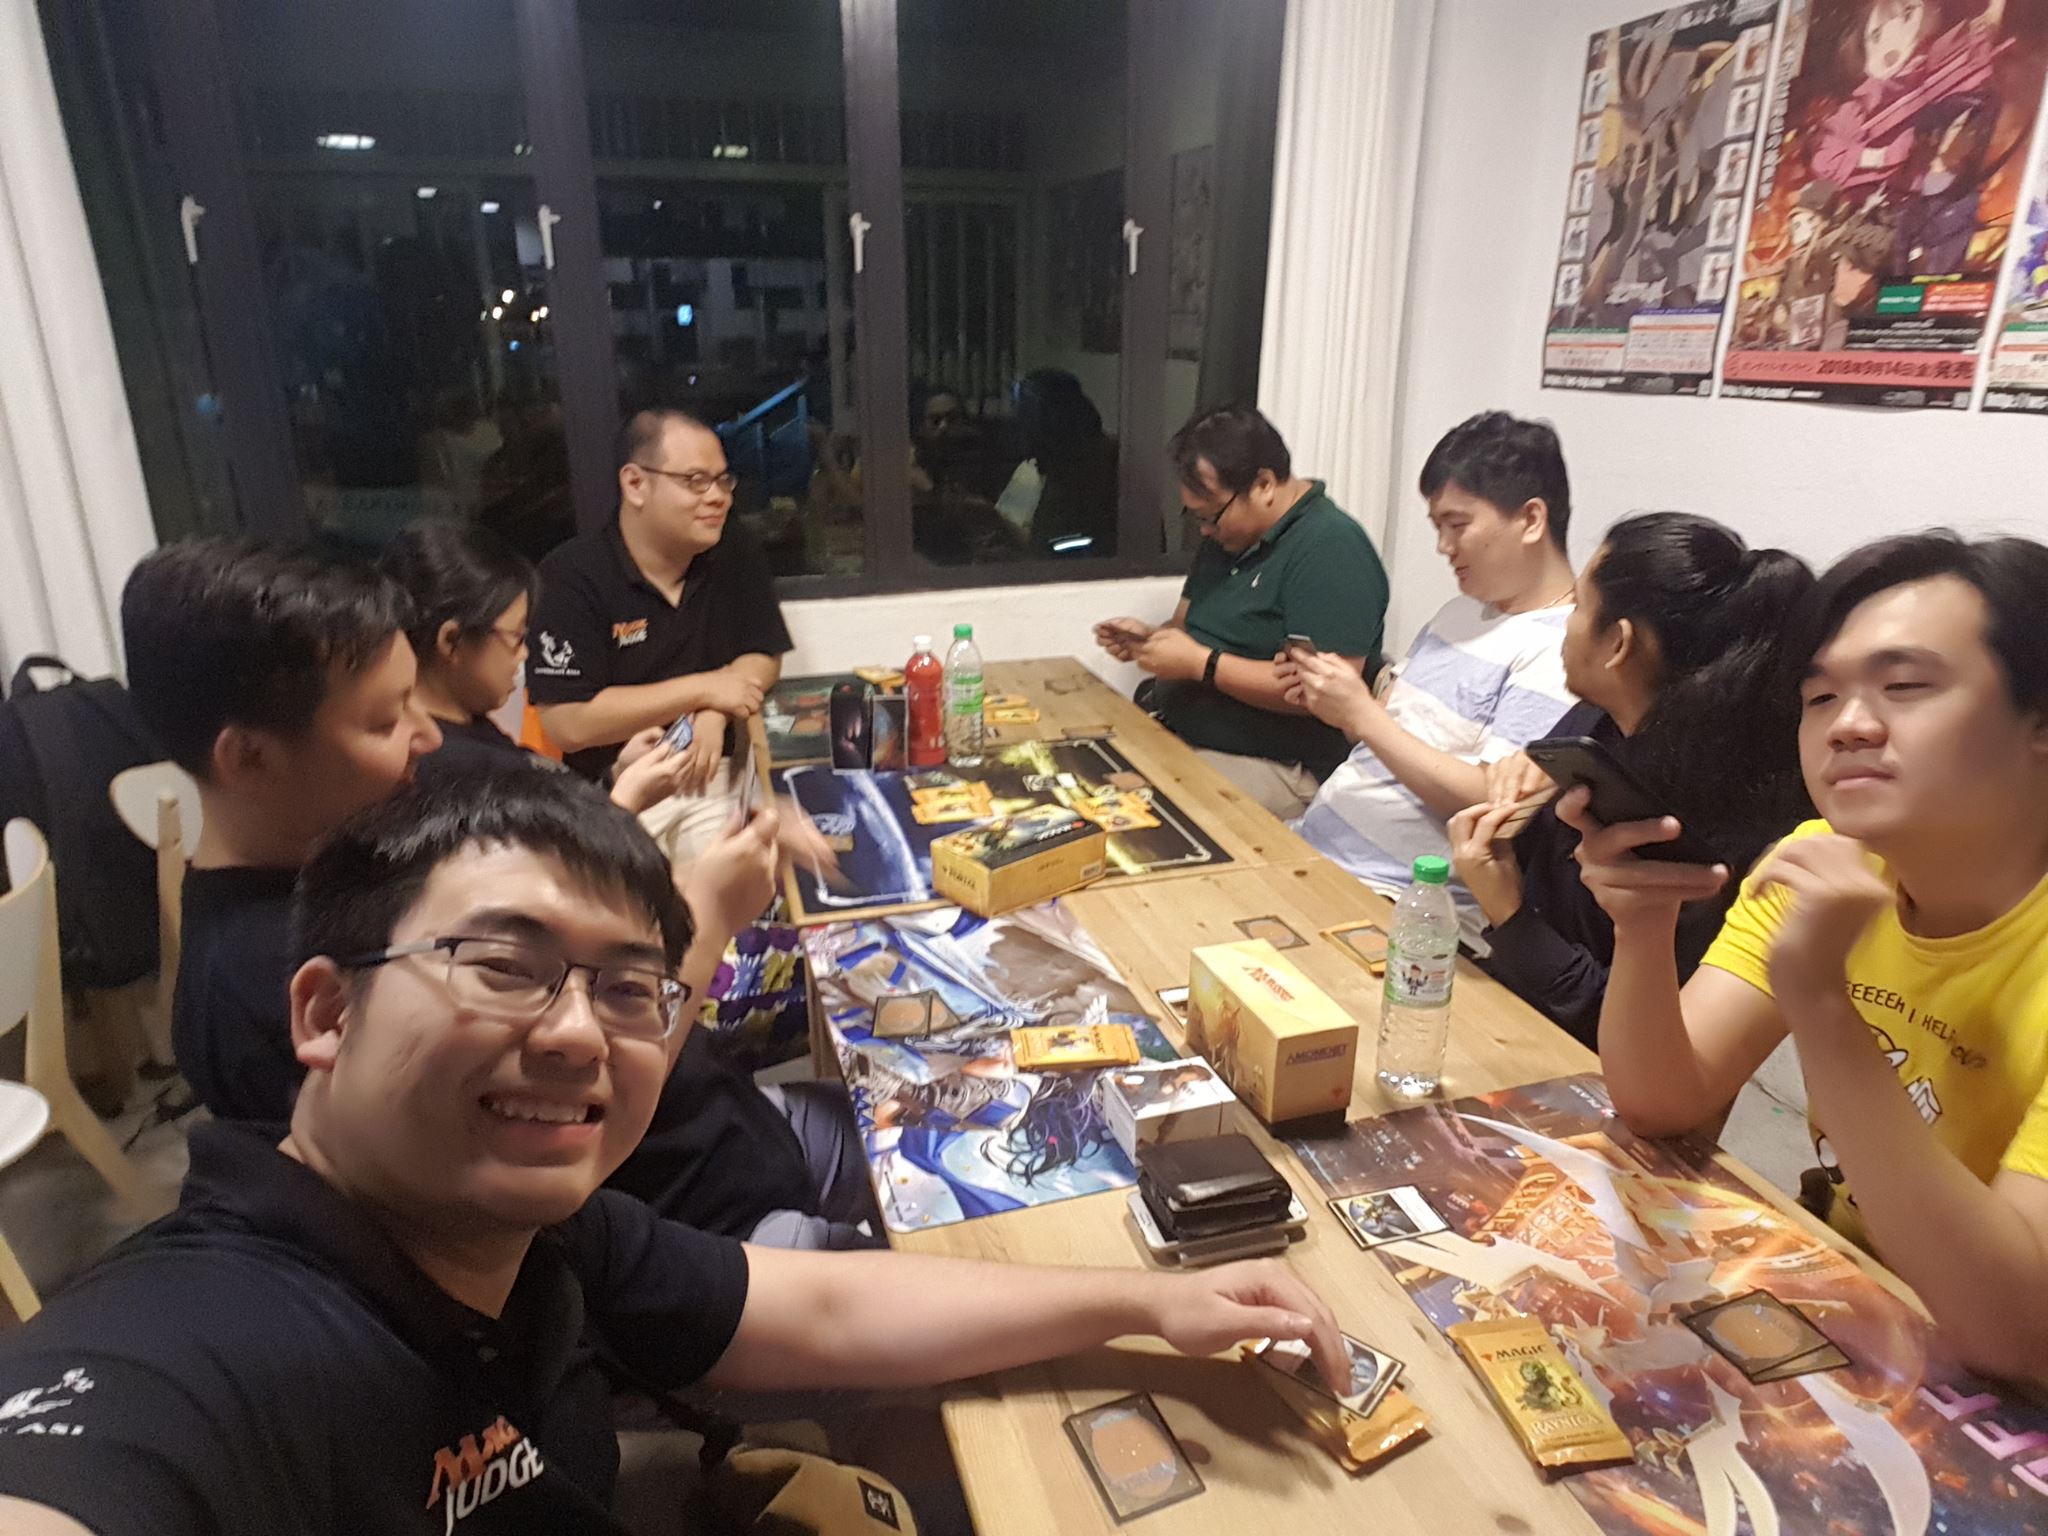 Singaporean Judges and Zie Aun Tan at their LGS drafting around 2am - plus stand-in scorekeeper